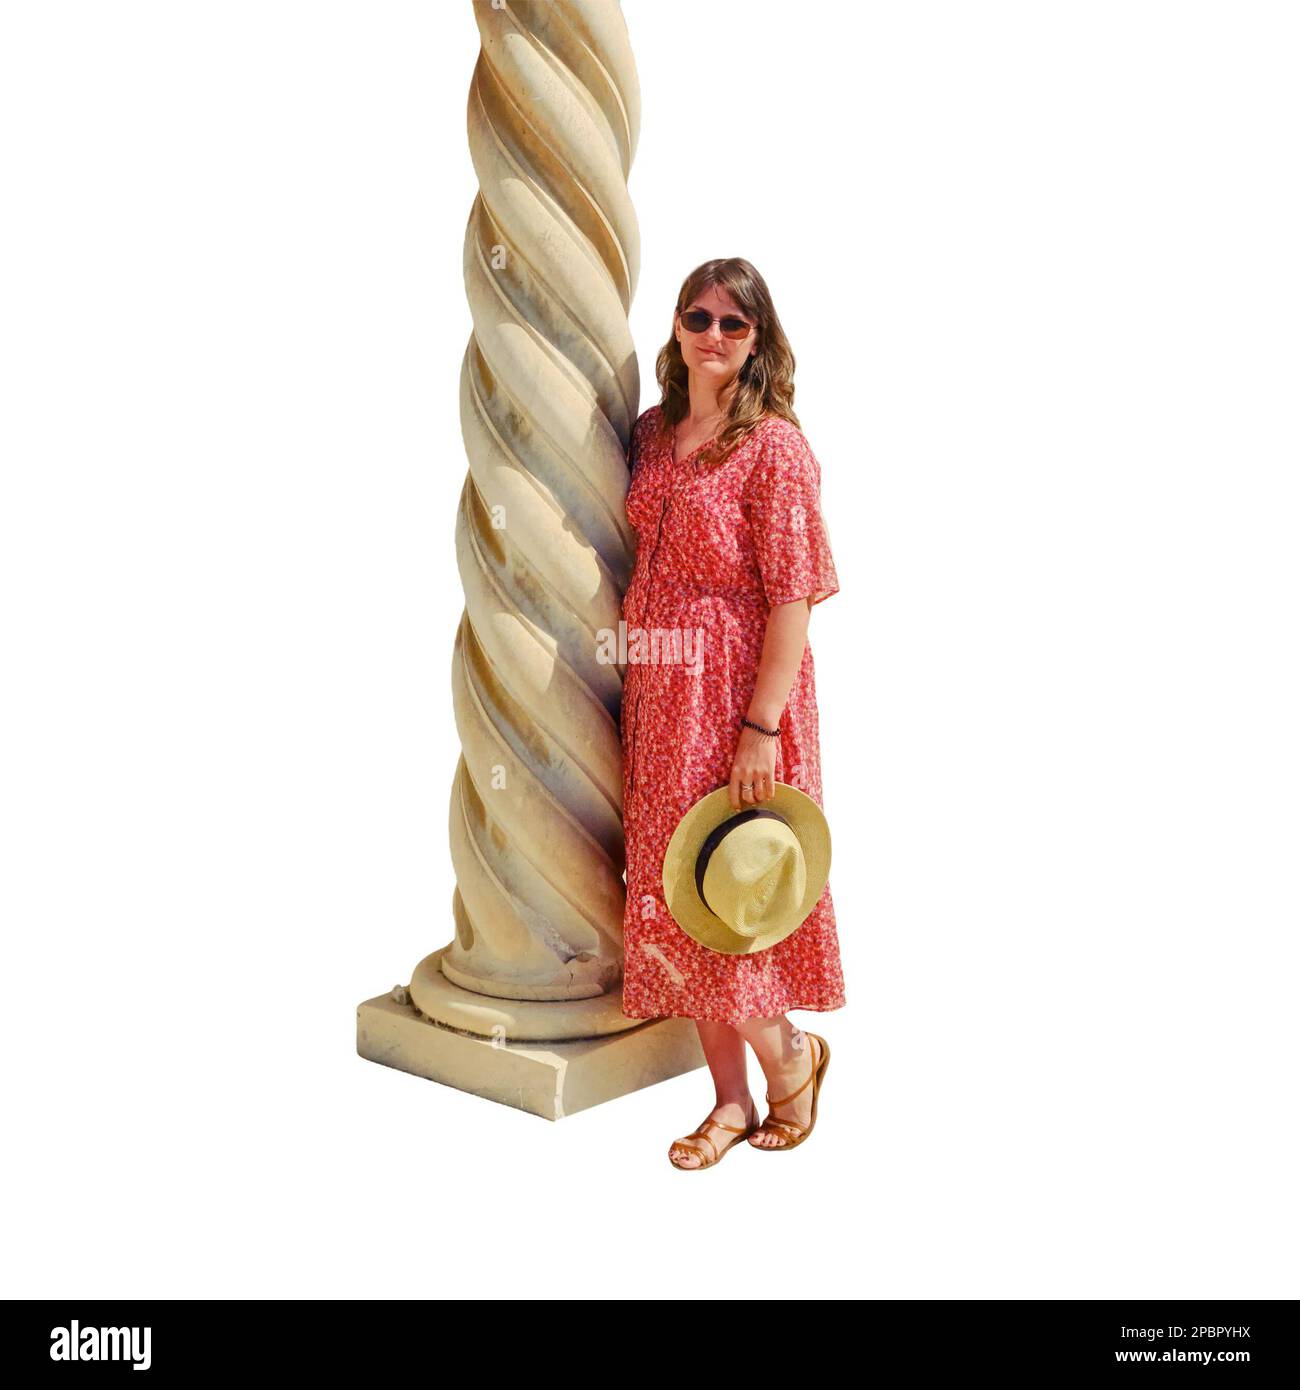 A woman stands next to the twisted spiral columns of a medieval French temple in Carthage, Tunisia, isolated on a white background Stock Photo